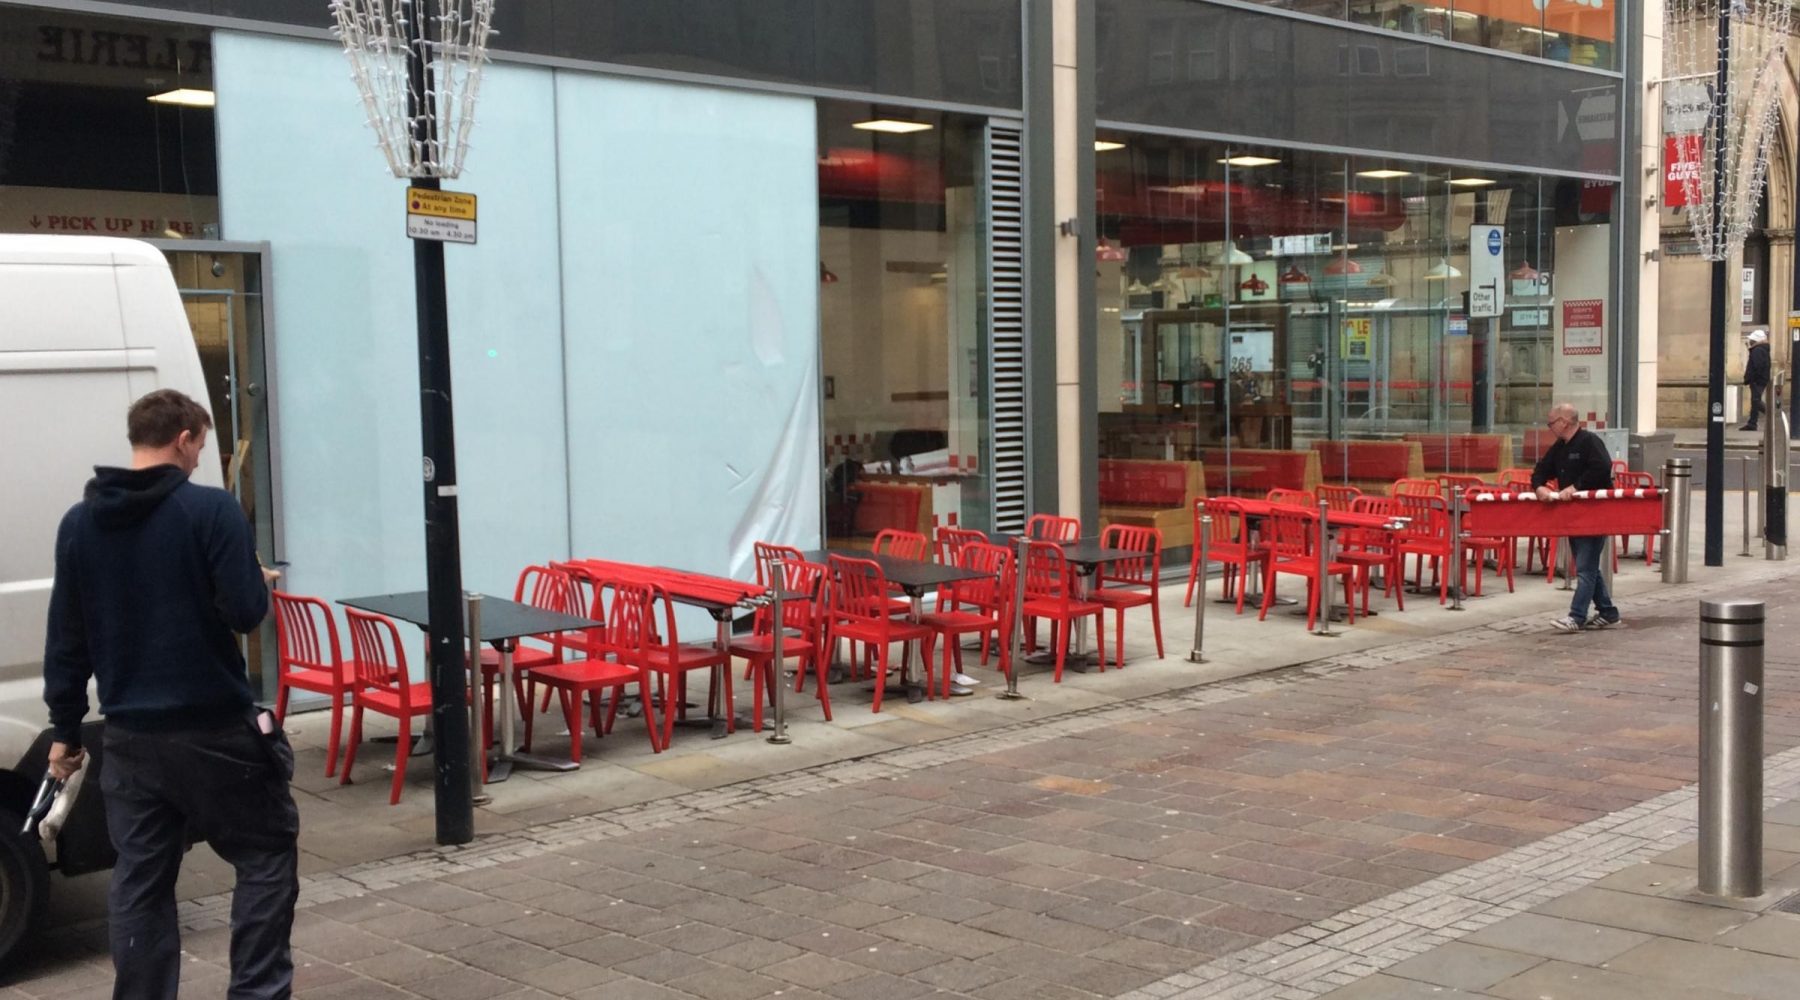 Workers clear fittings from Bradford Five Guys